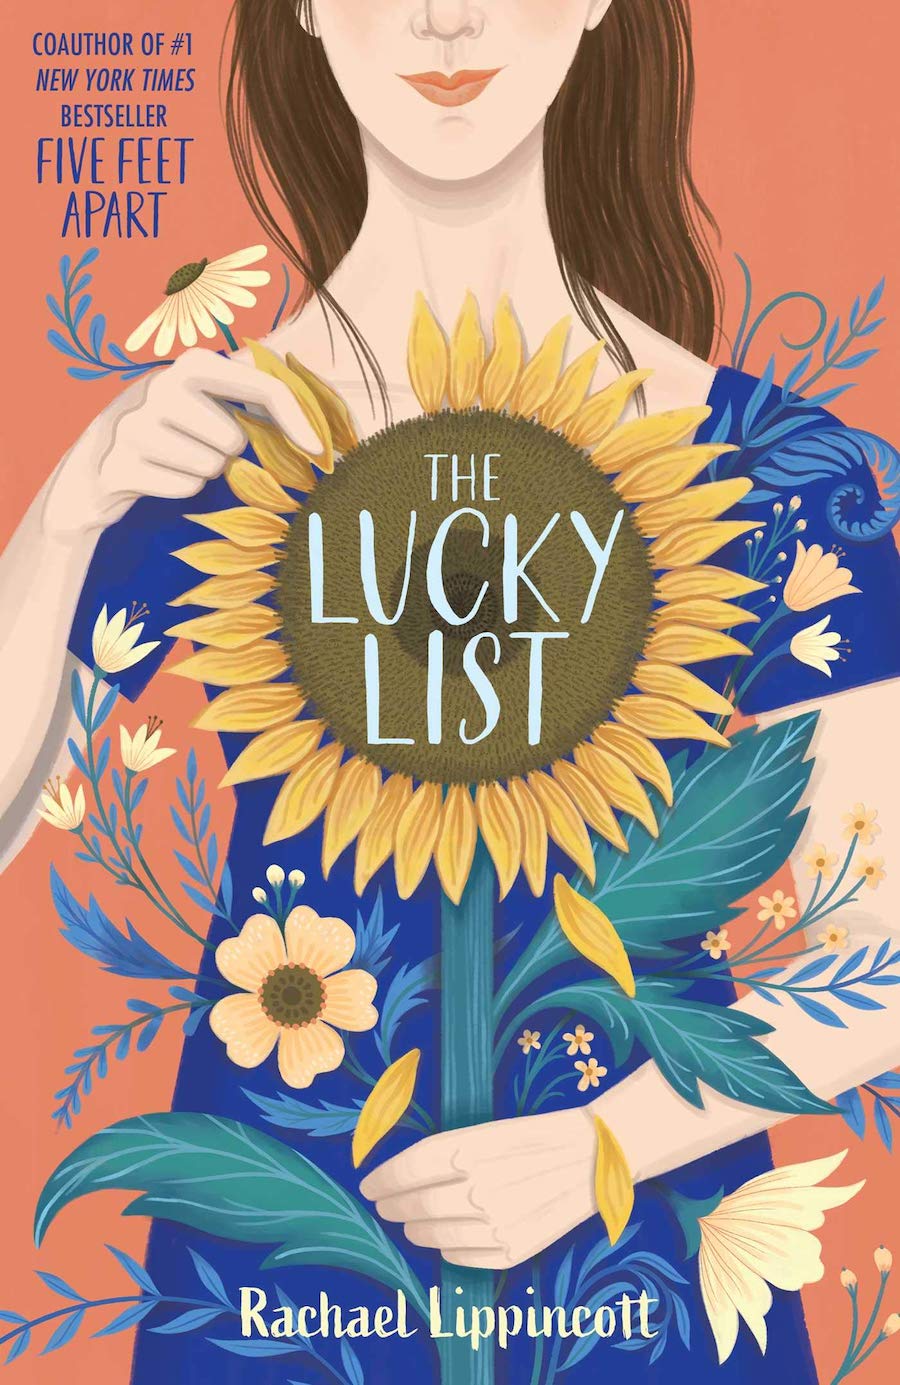 YA books with LGBTQ main characters: The Lucky List by Rachel Lippincott